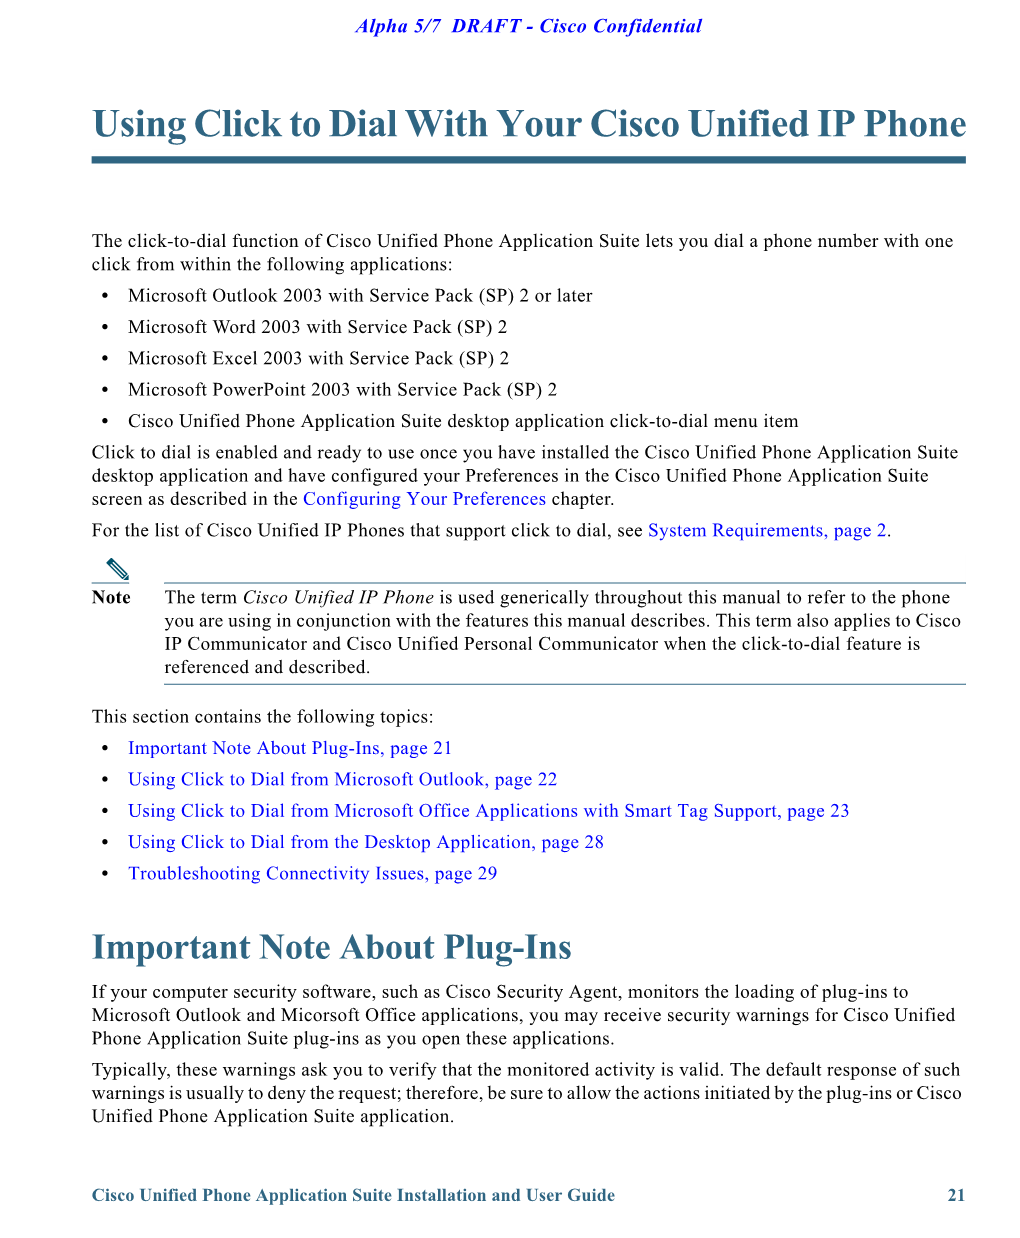 Using Click to Dial with Your Cisco Unified IP Phone